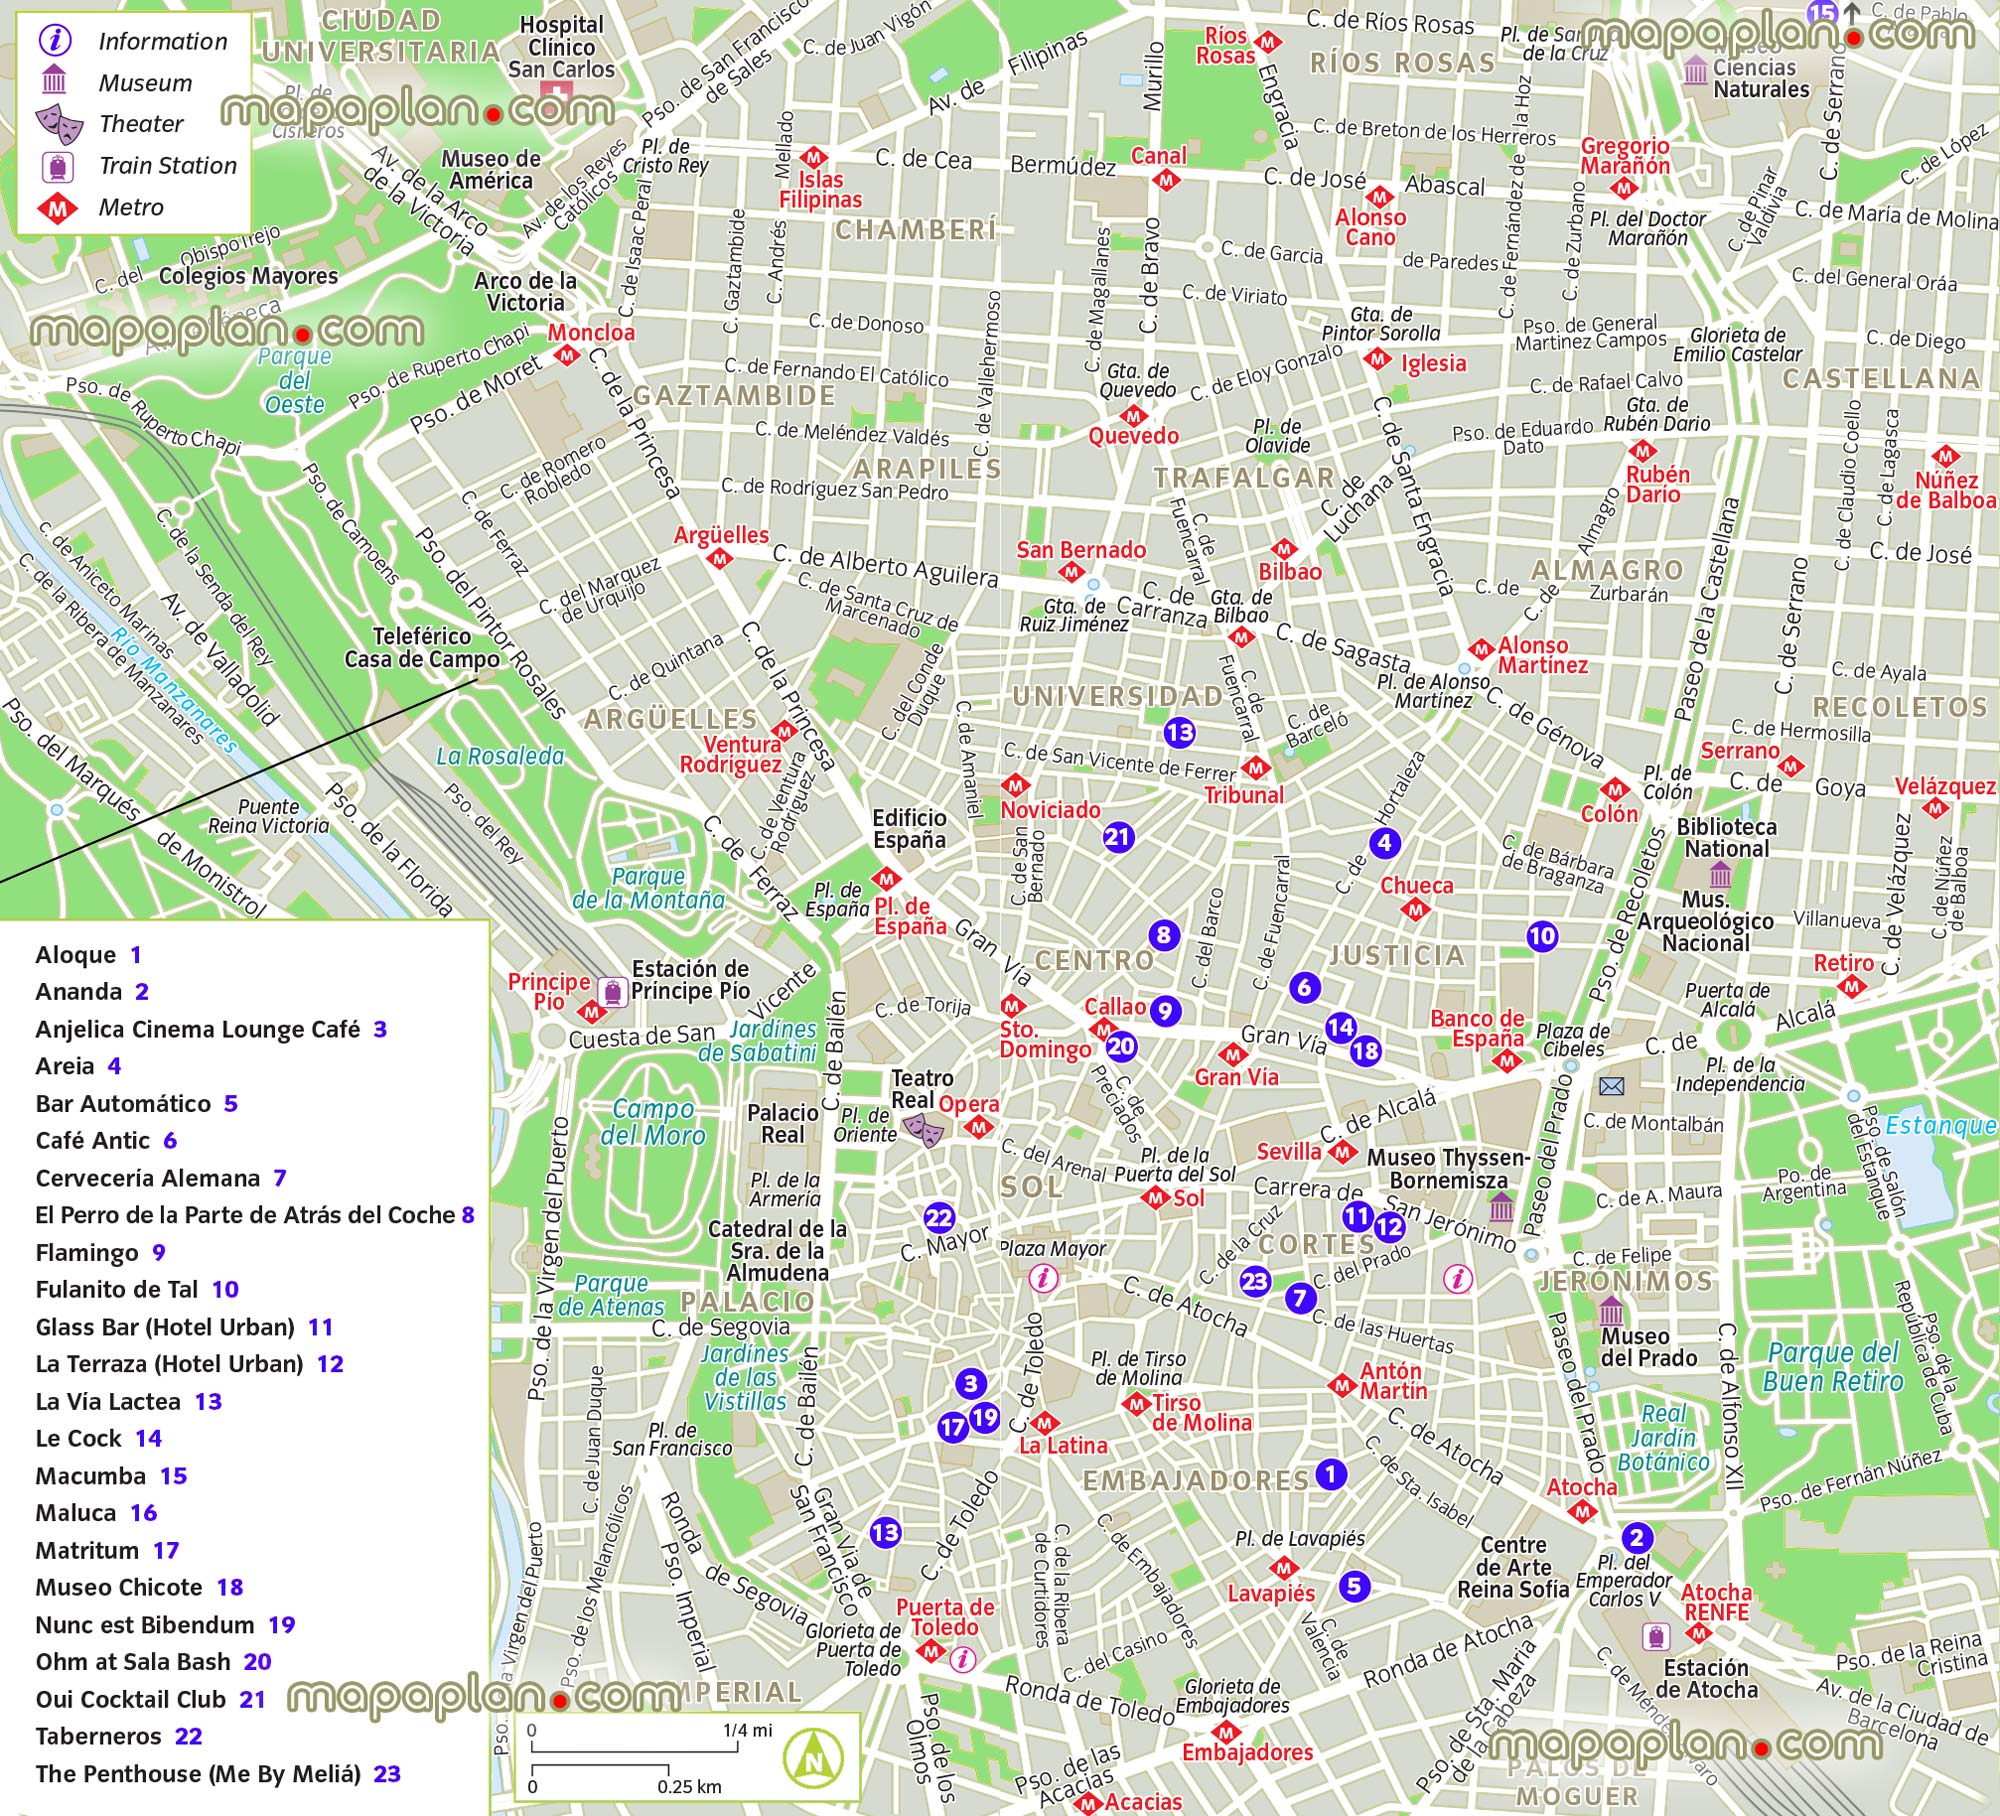 nightlife clubs pubs bars mapas Madrid Top tourist attractions map